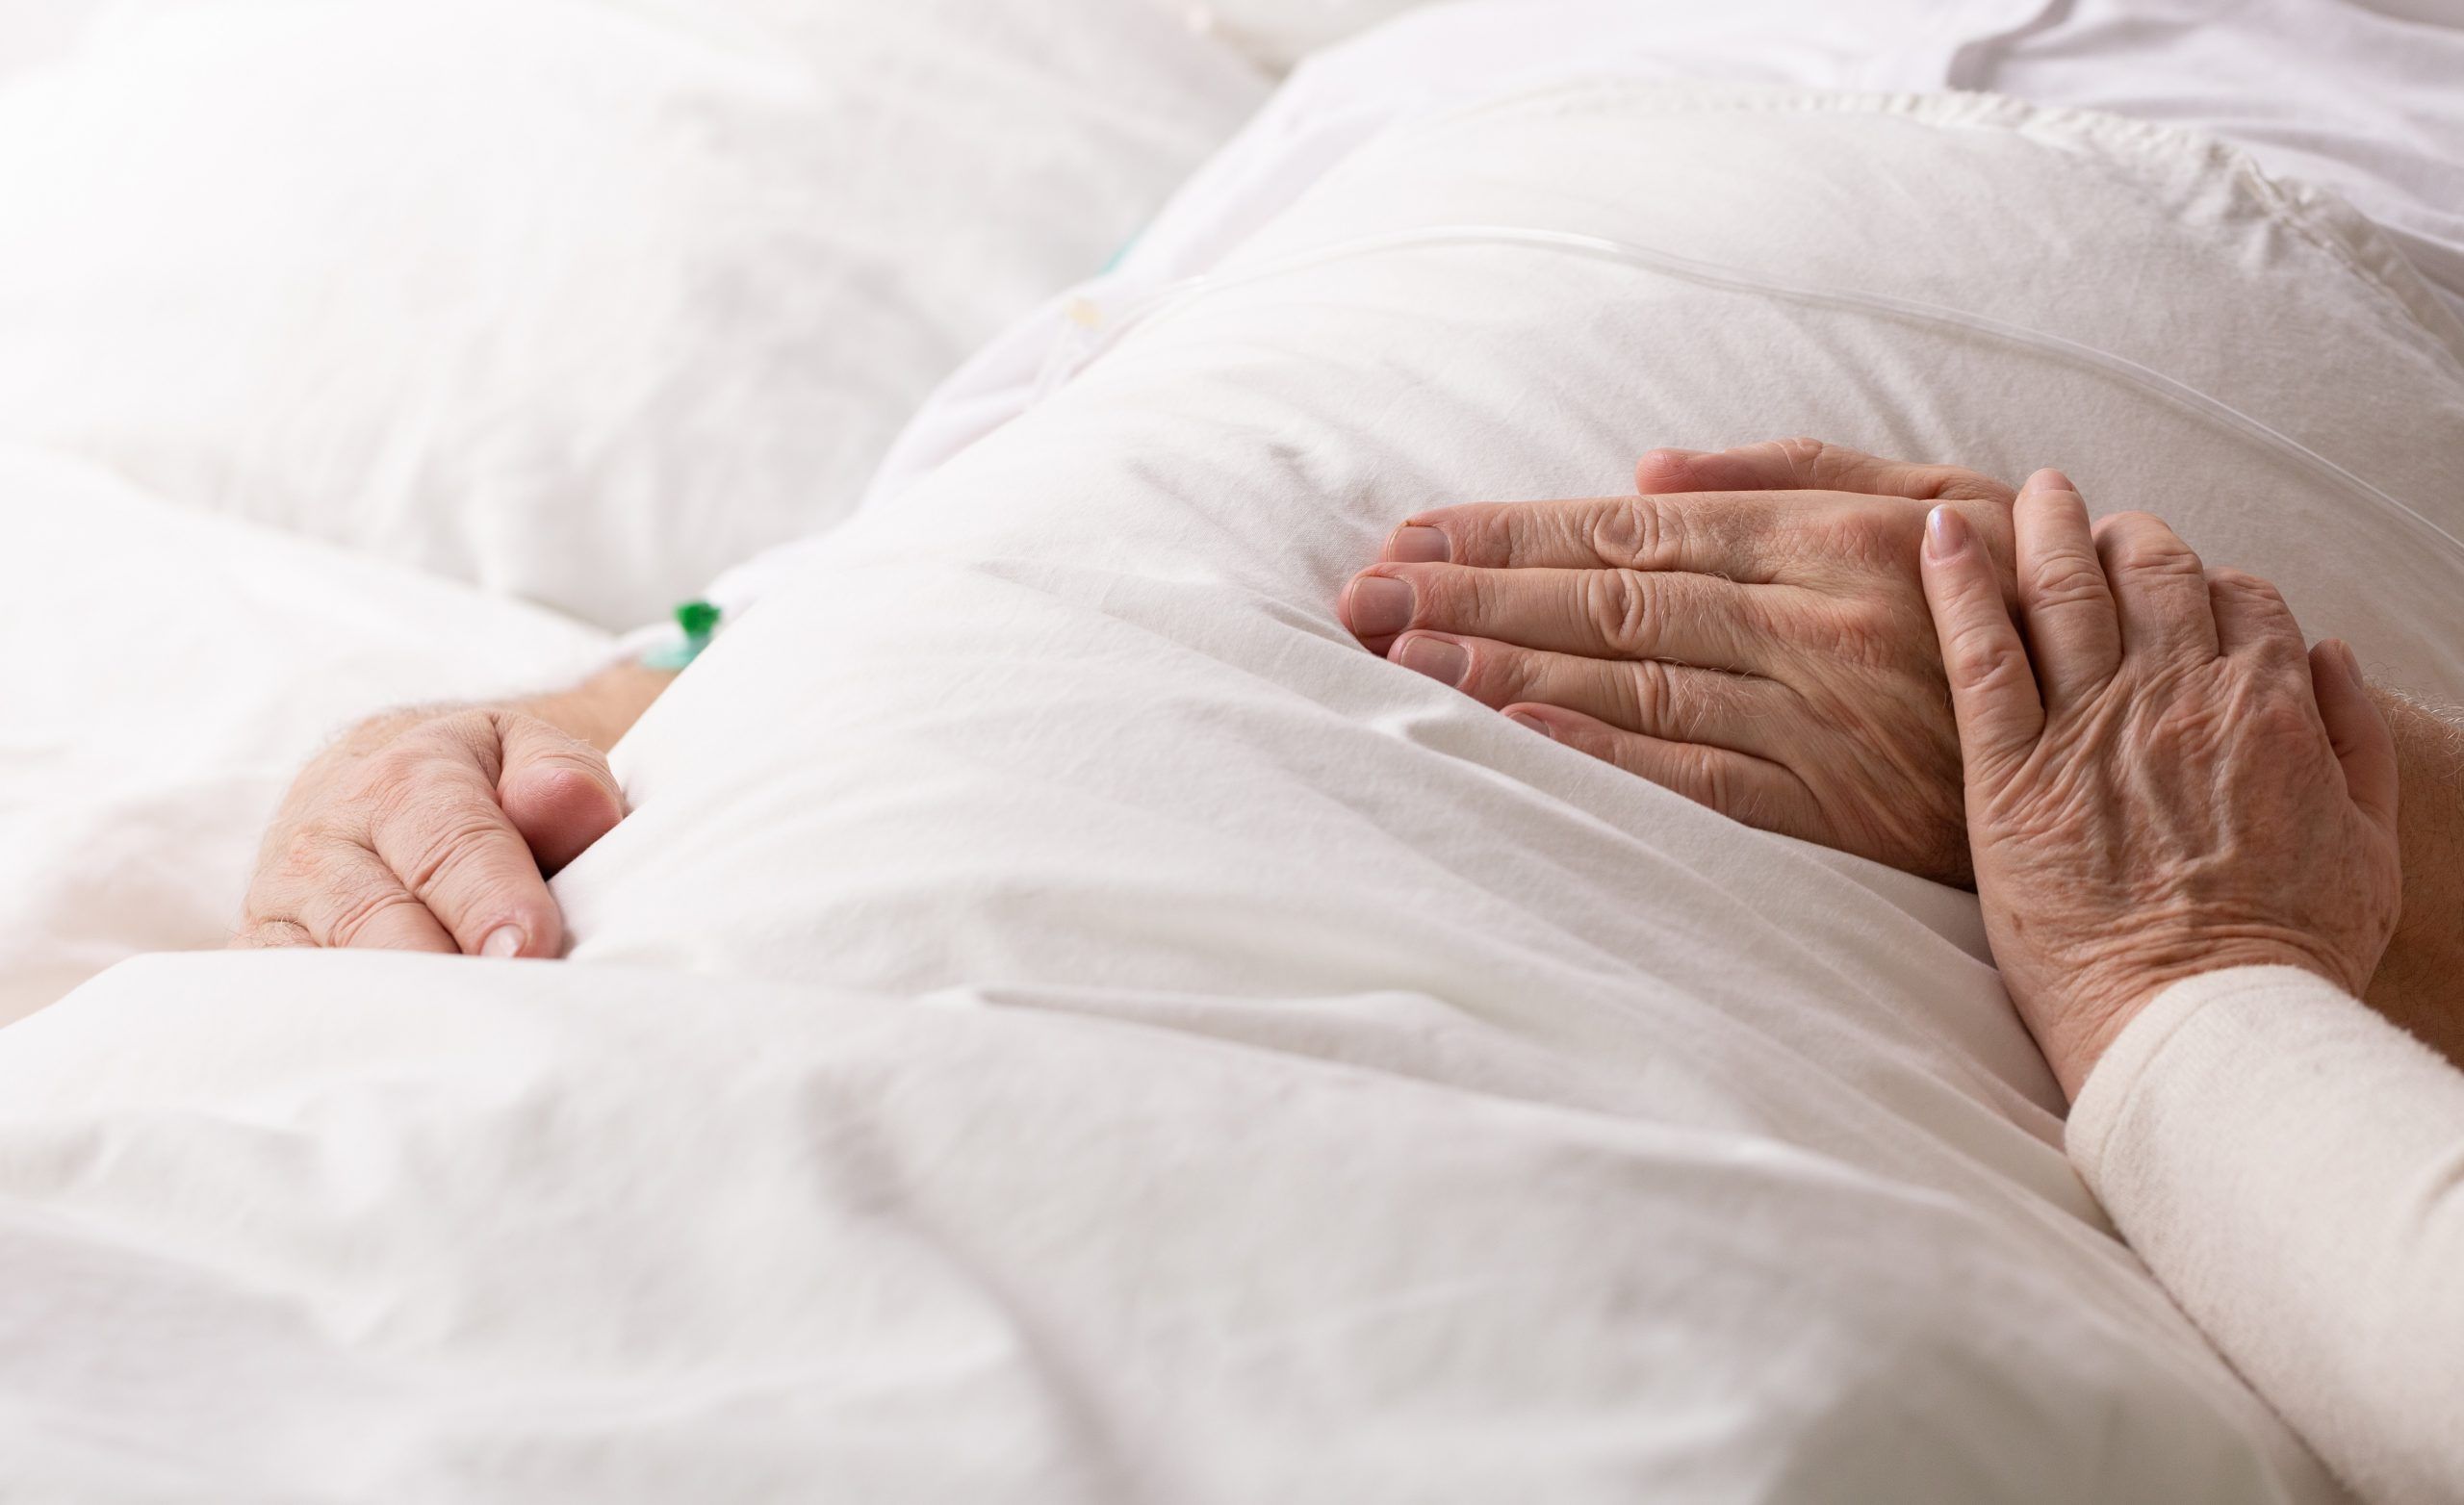 The Canadian Hospice Palliative Care Association is calling on health authorities to “implement a more compassionate approach to end-of-life visitations … during the COVID-19 pandemic.”